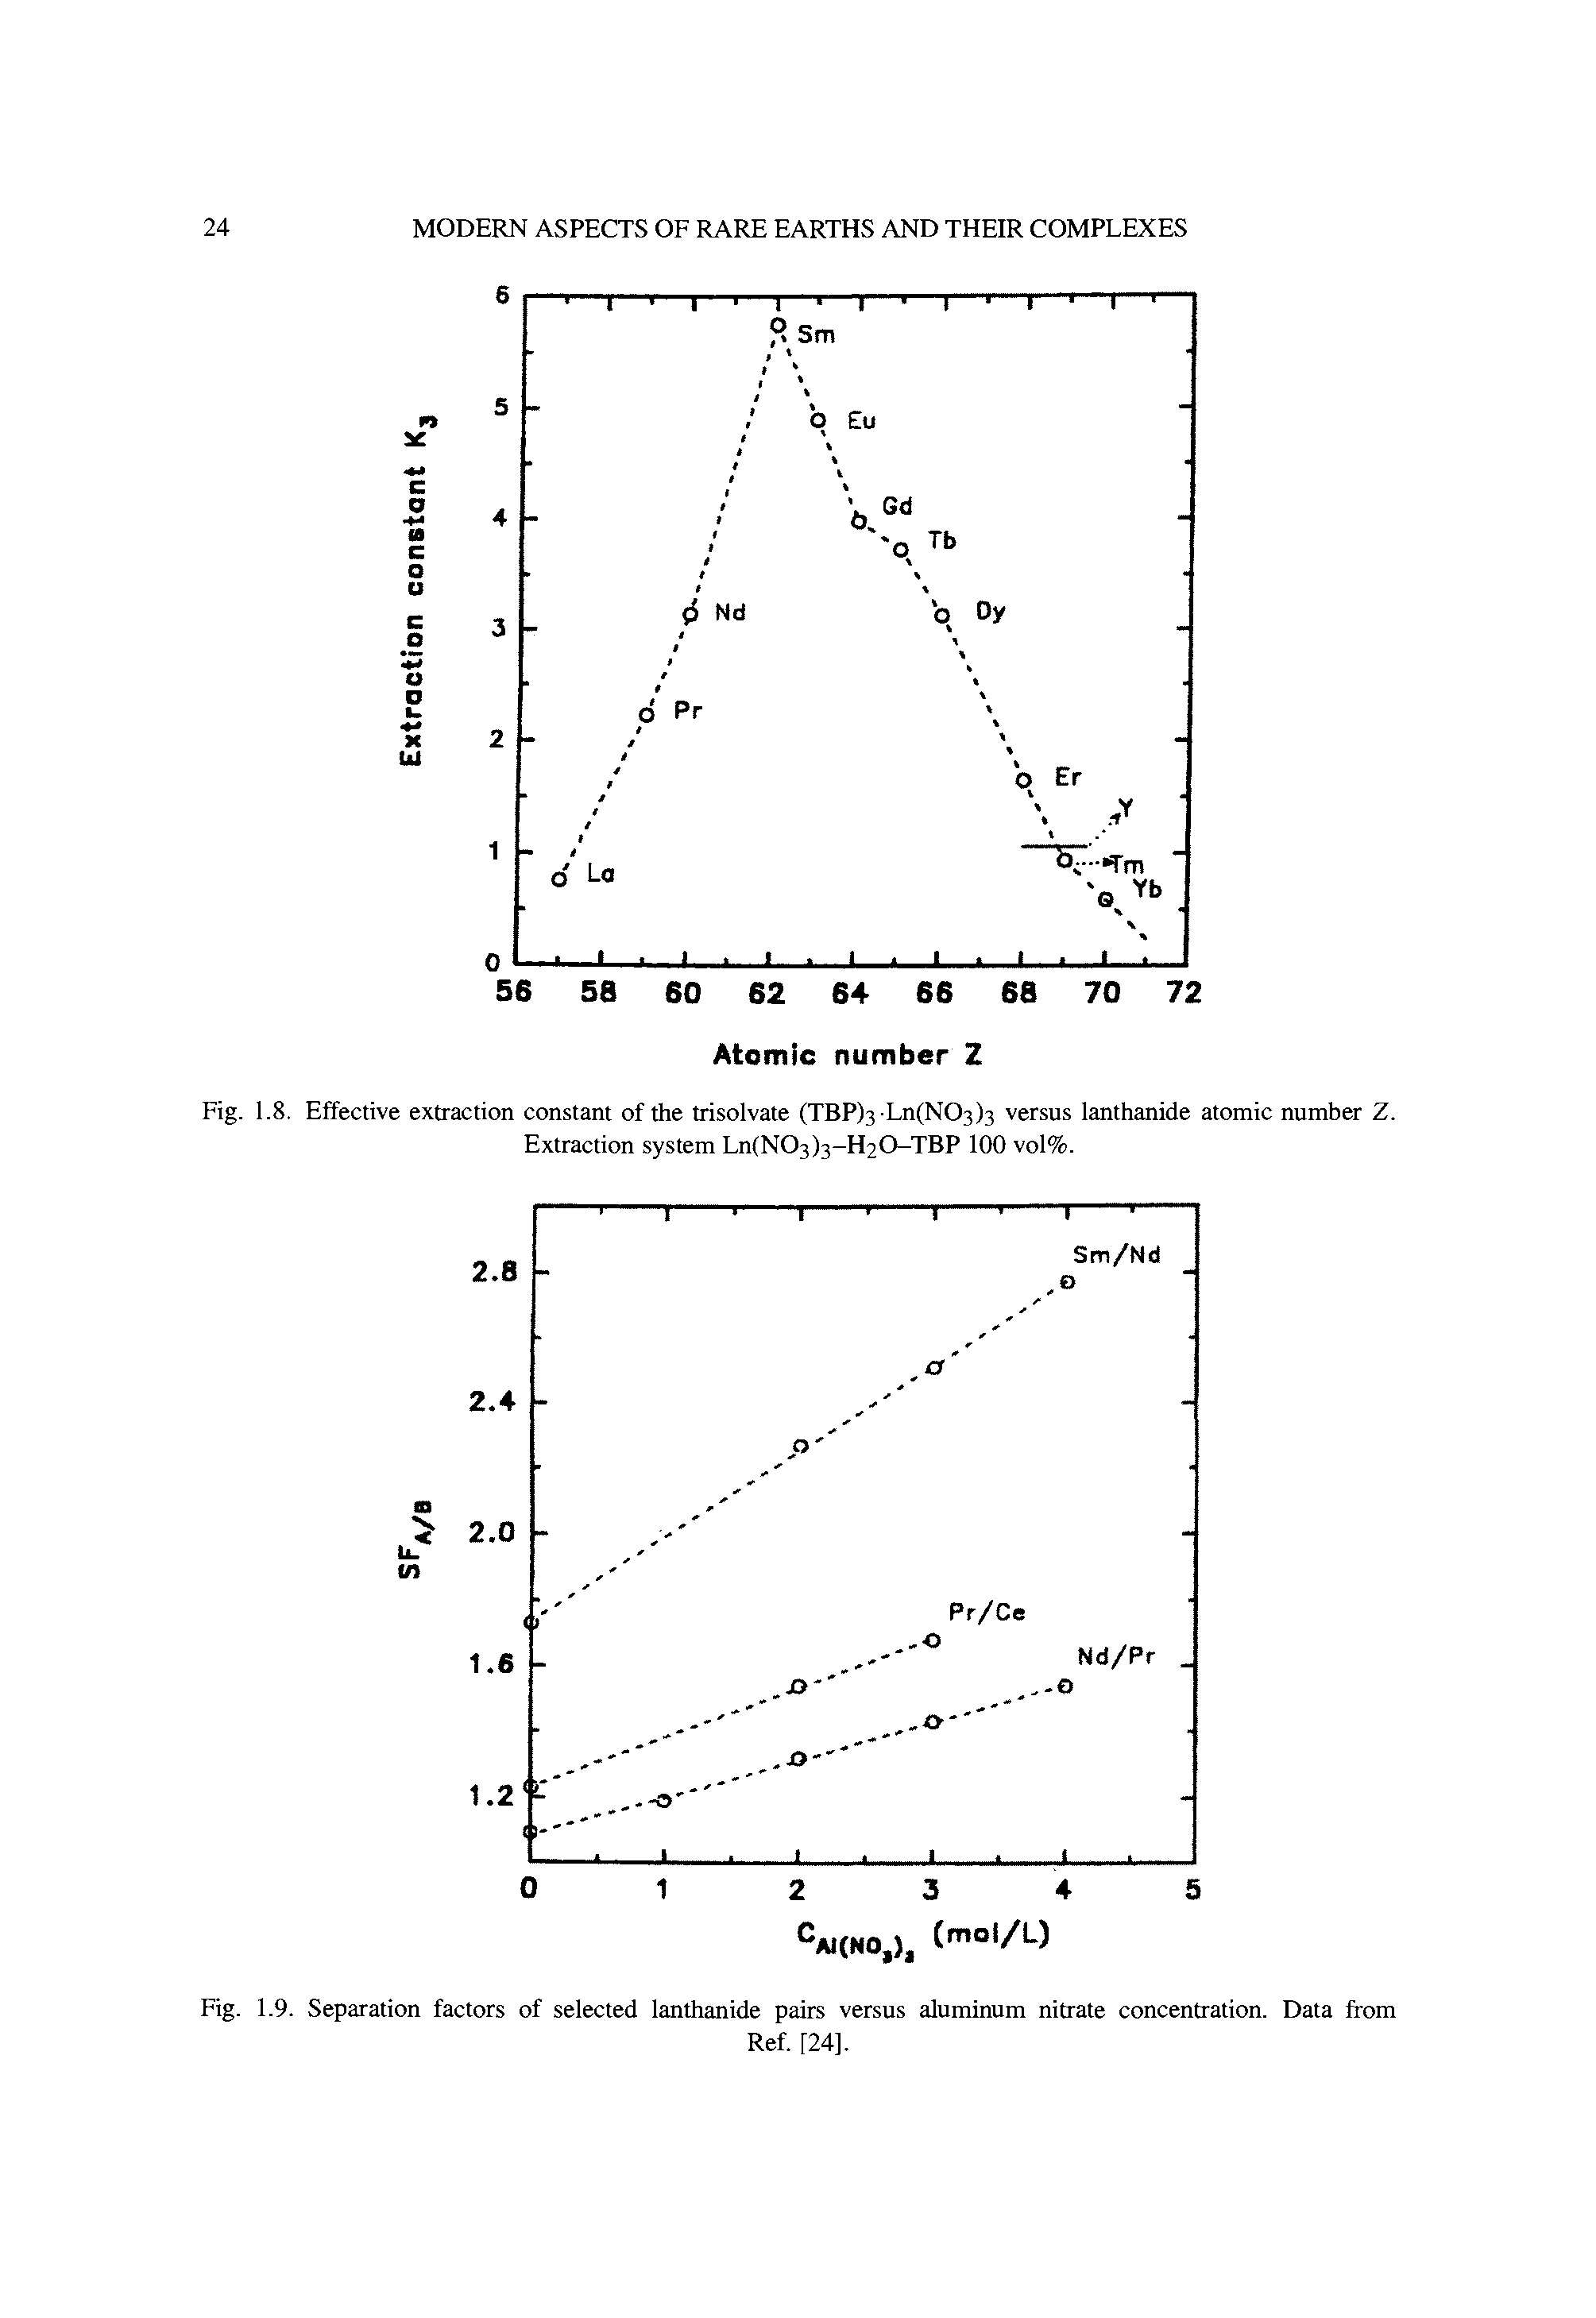 Fig. 1.8. Effective extraction constant of the trisolvate (TBP)3-Ln(N03)3 versus lanthanide atomic number Z. Extraction system Ln(N03)3-H20-TBP 100 vol%.